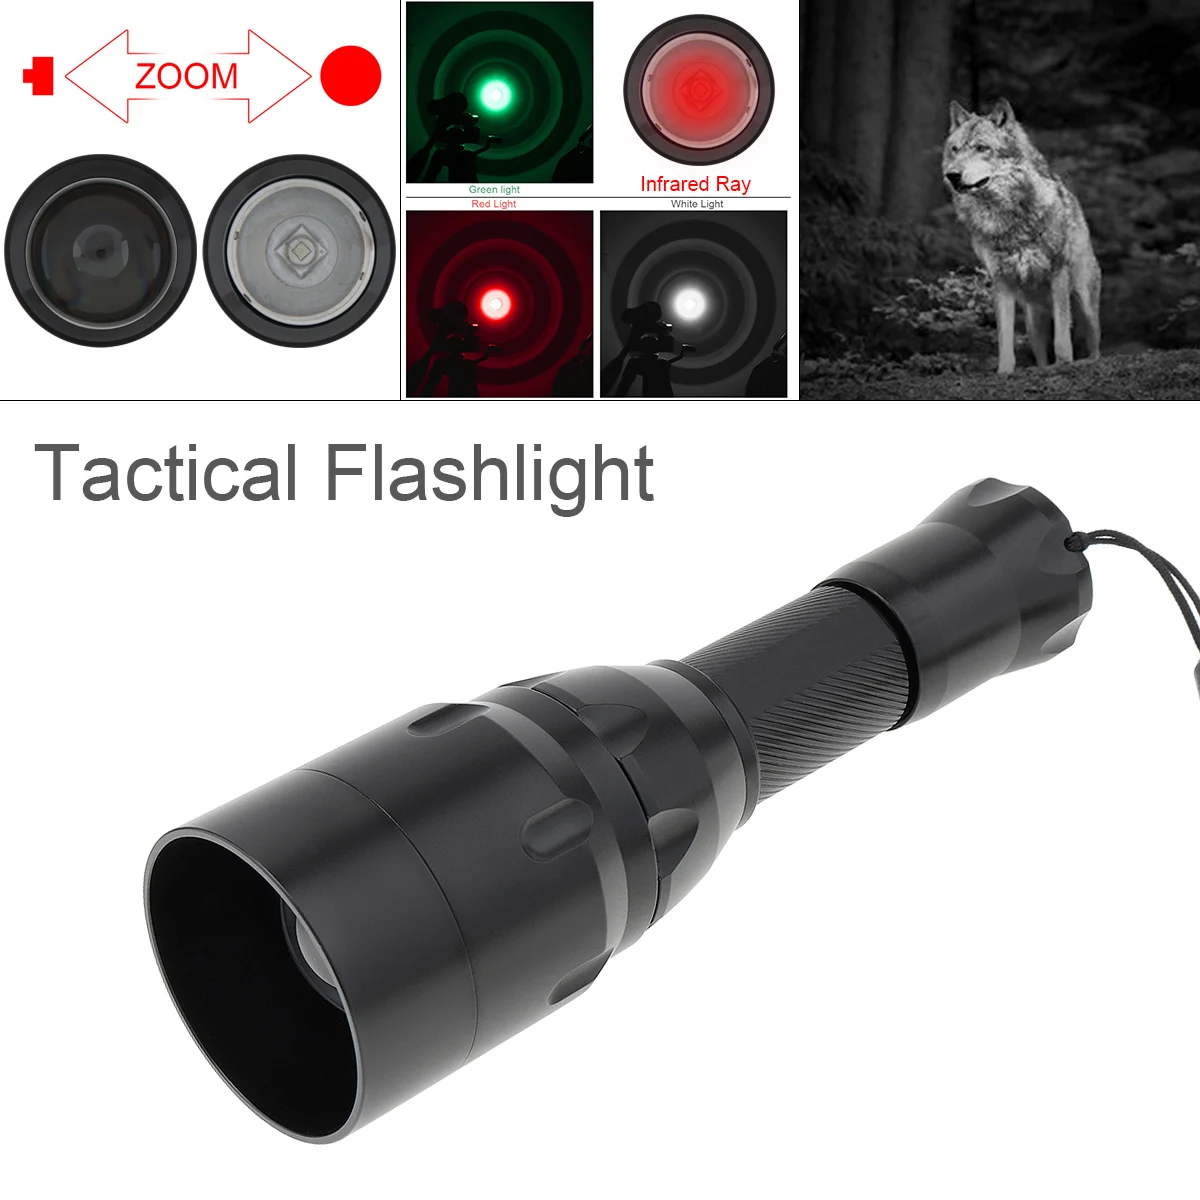 

C16 Zoomable Focus Adjustable 1500 Lumens XPE Red Green White Infrared Light 850nm LED Range Radiation Tactical Flashlight